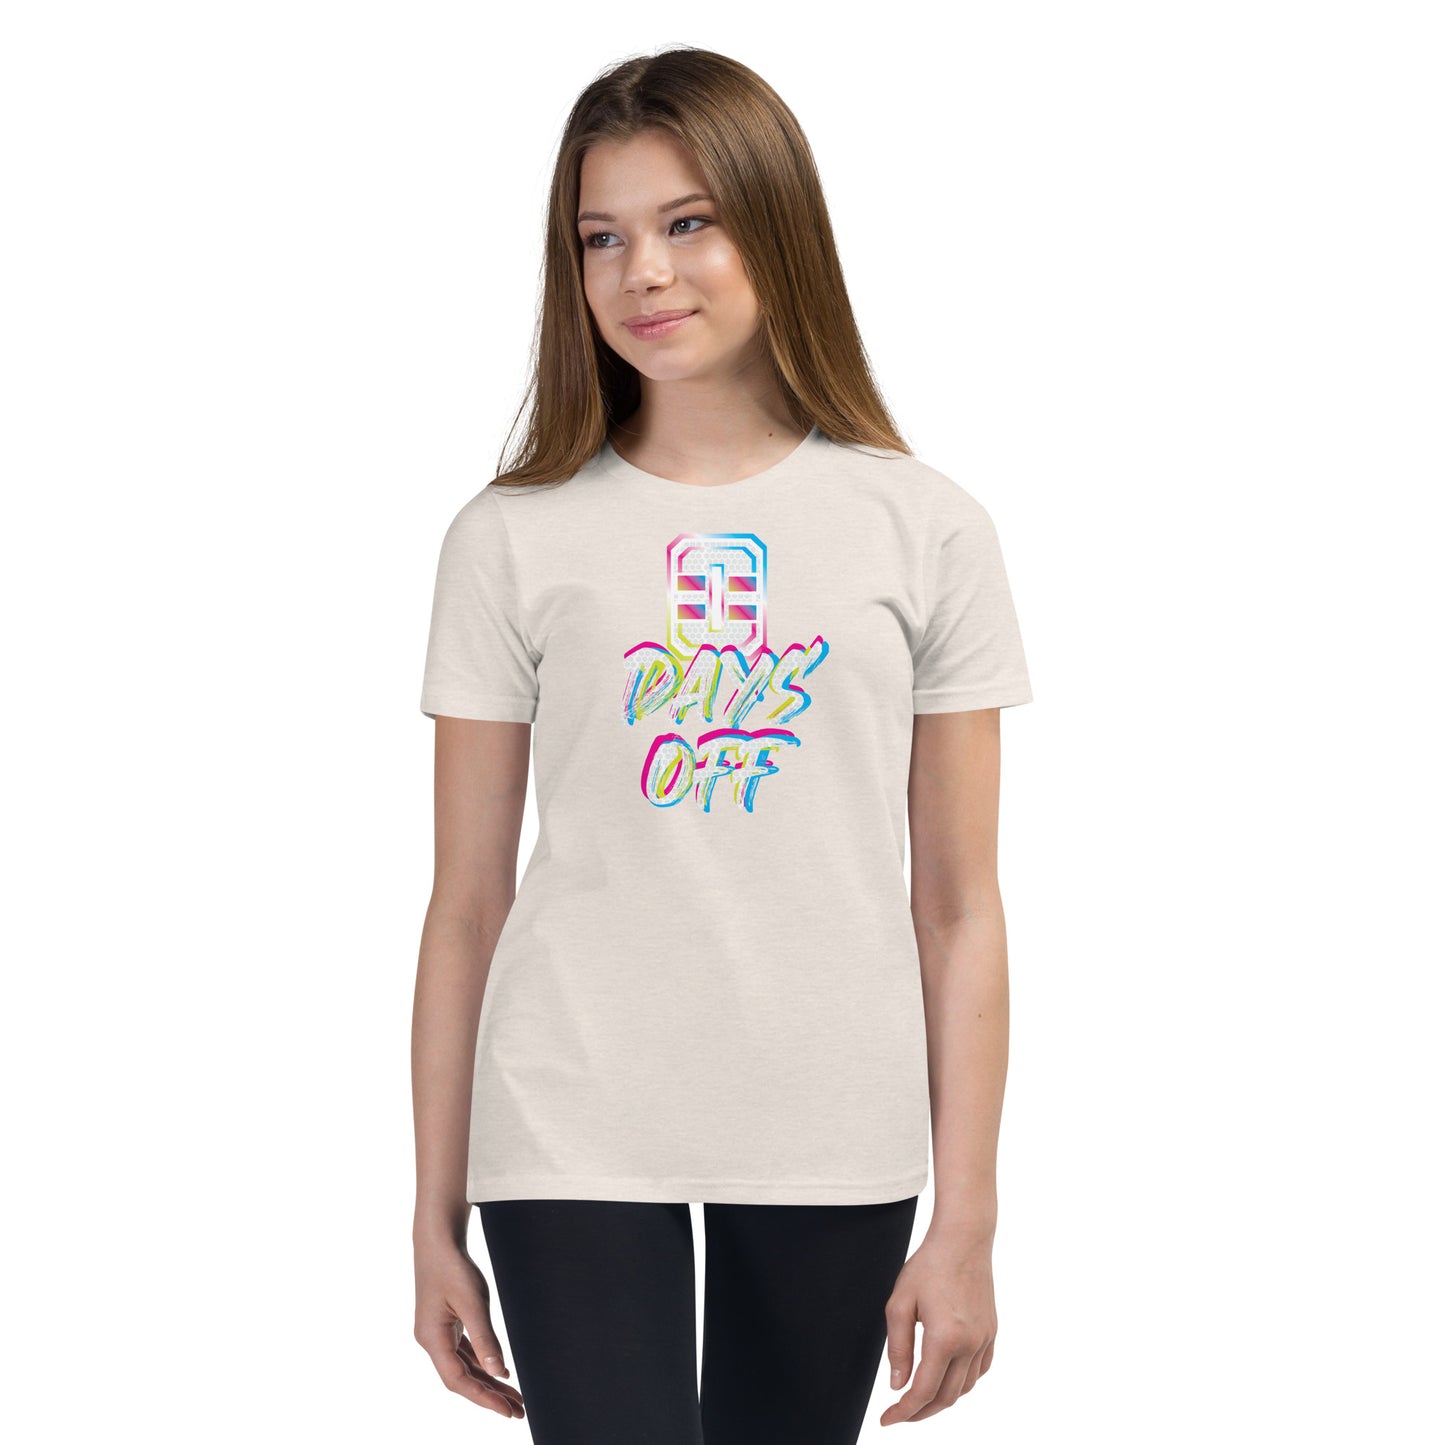 OM Hype 0 Days Off Youth Short Sleeve T-Shirt